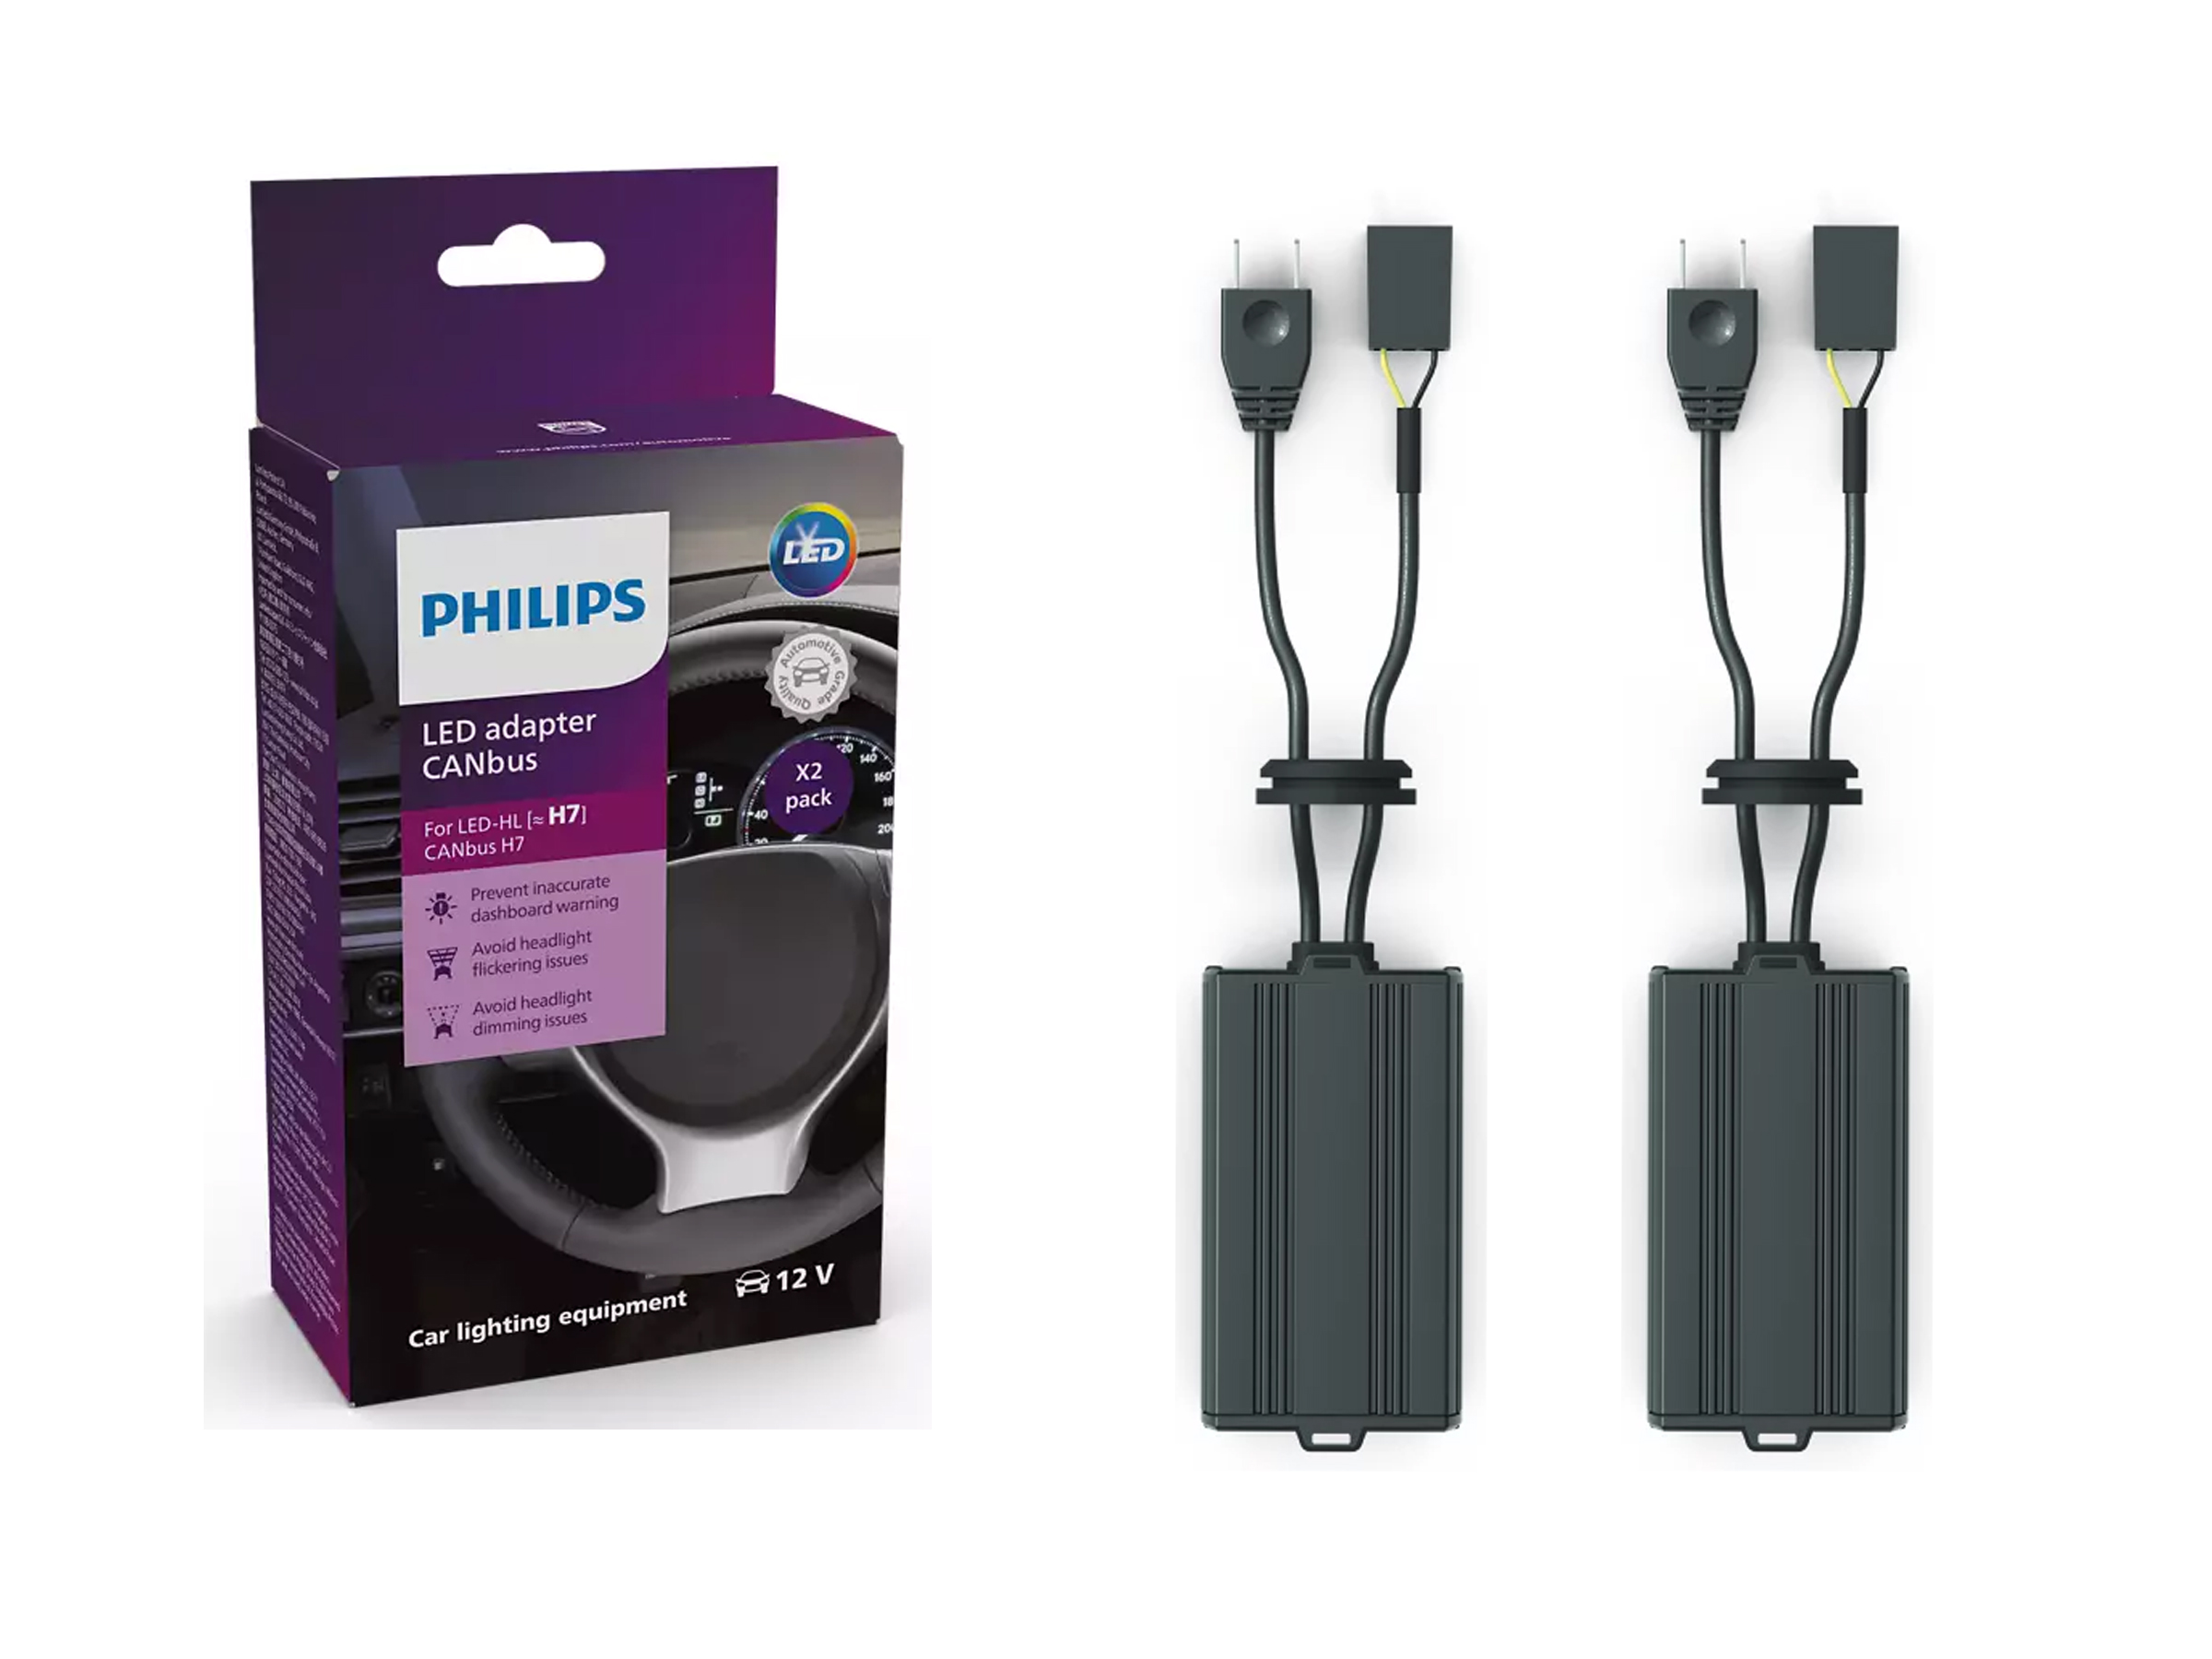 2x Original Philips Canbus Adapter for Ultinon Pro6000 H7 LED